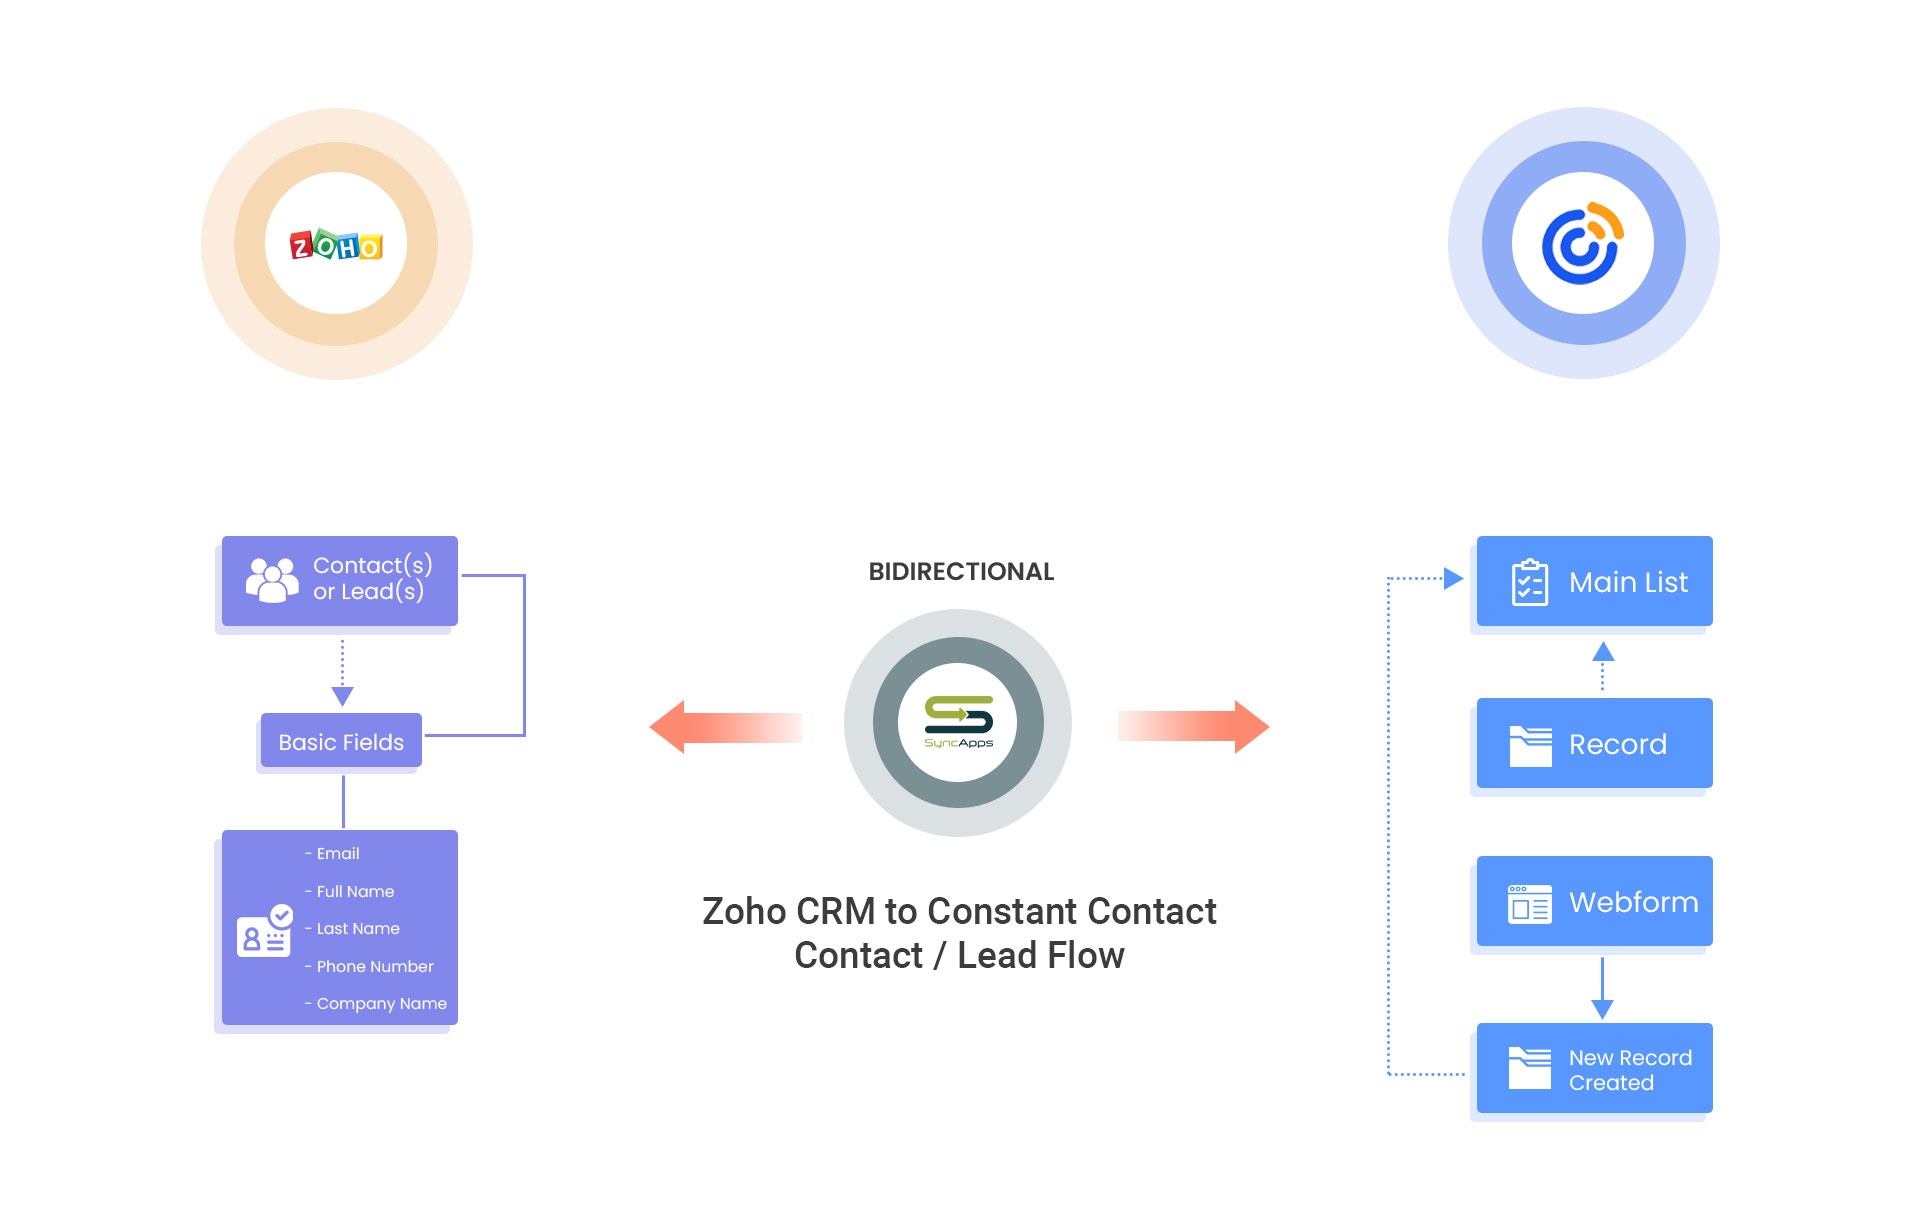 Zoho CRM to Constant Contact